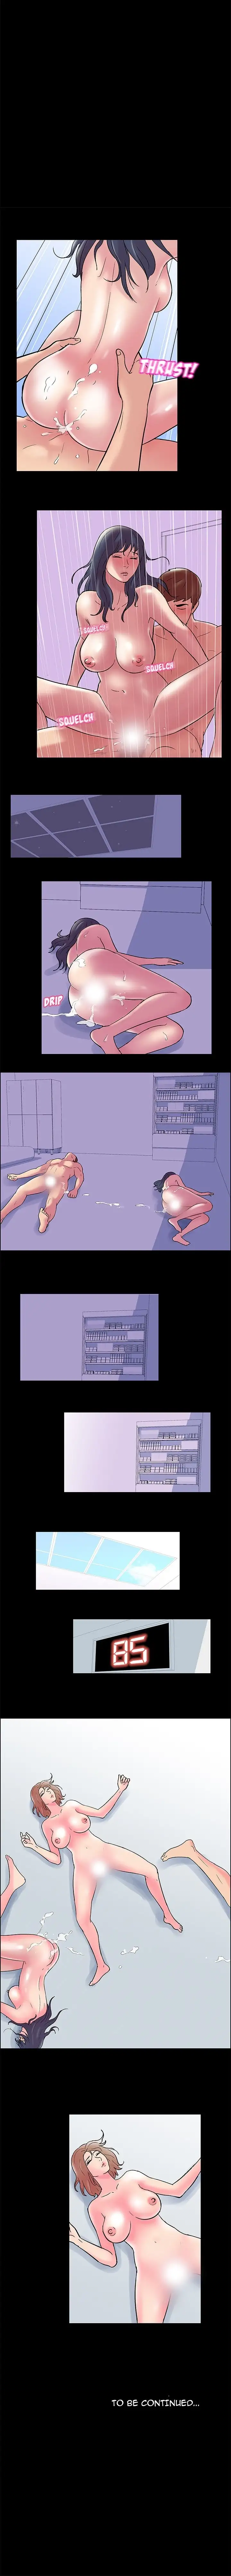 The White Room - Chapter 9 Page 5